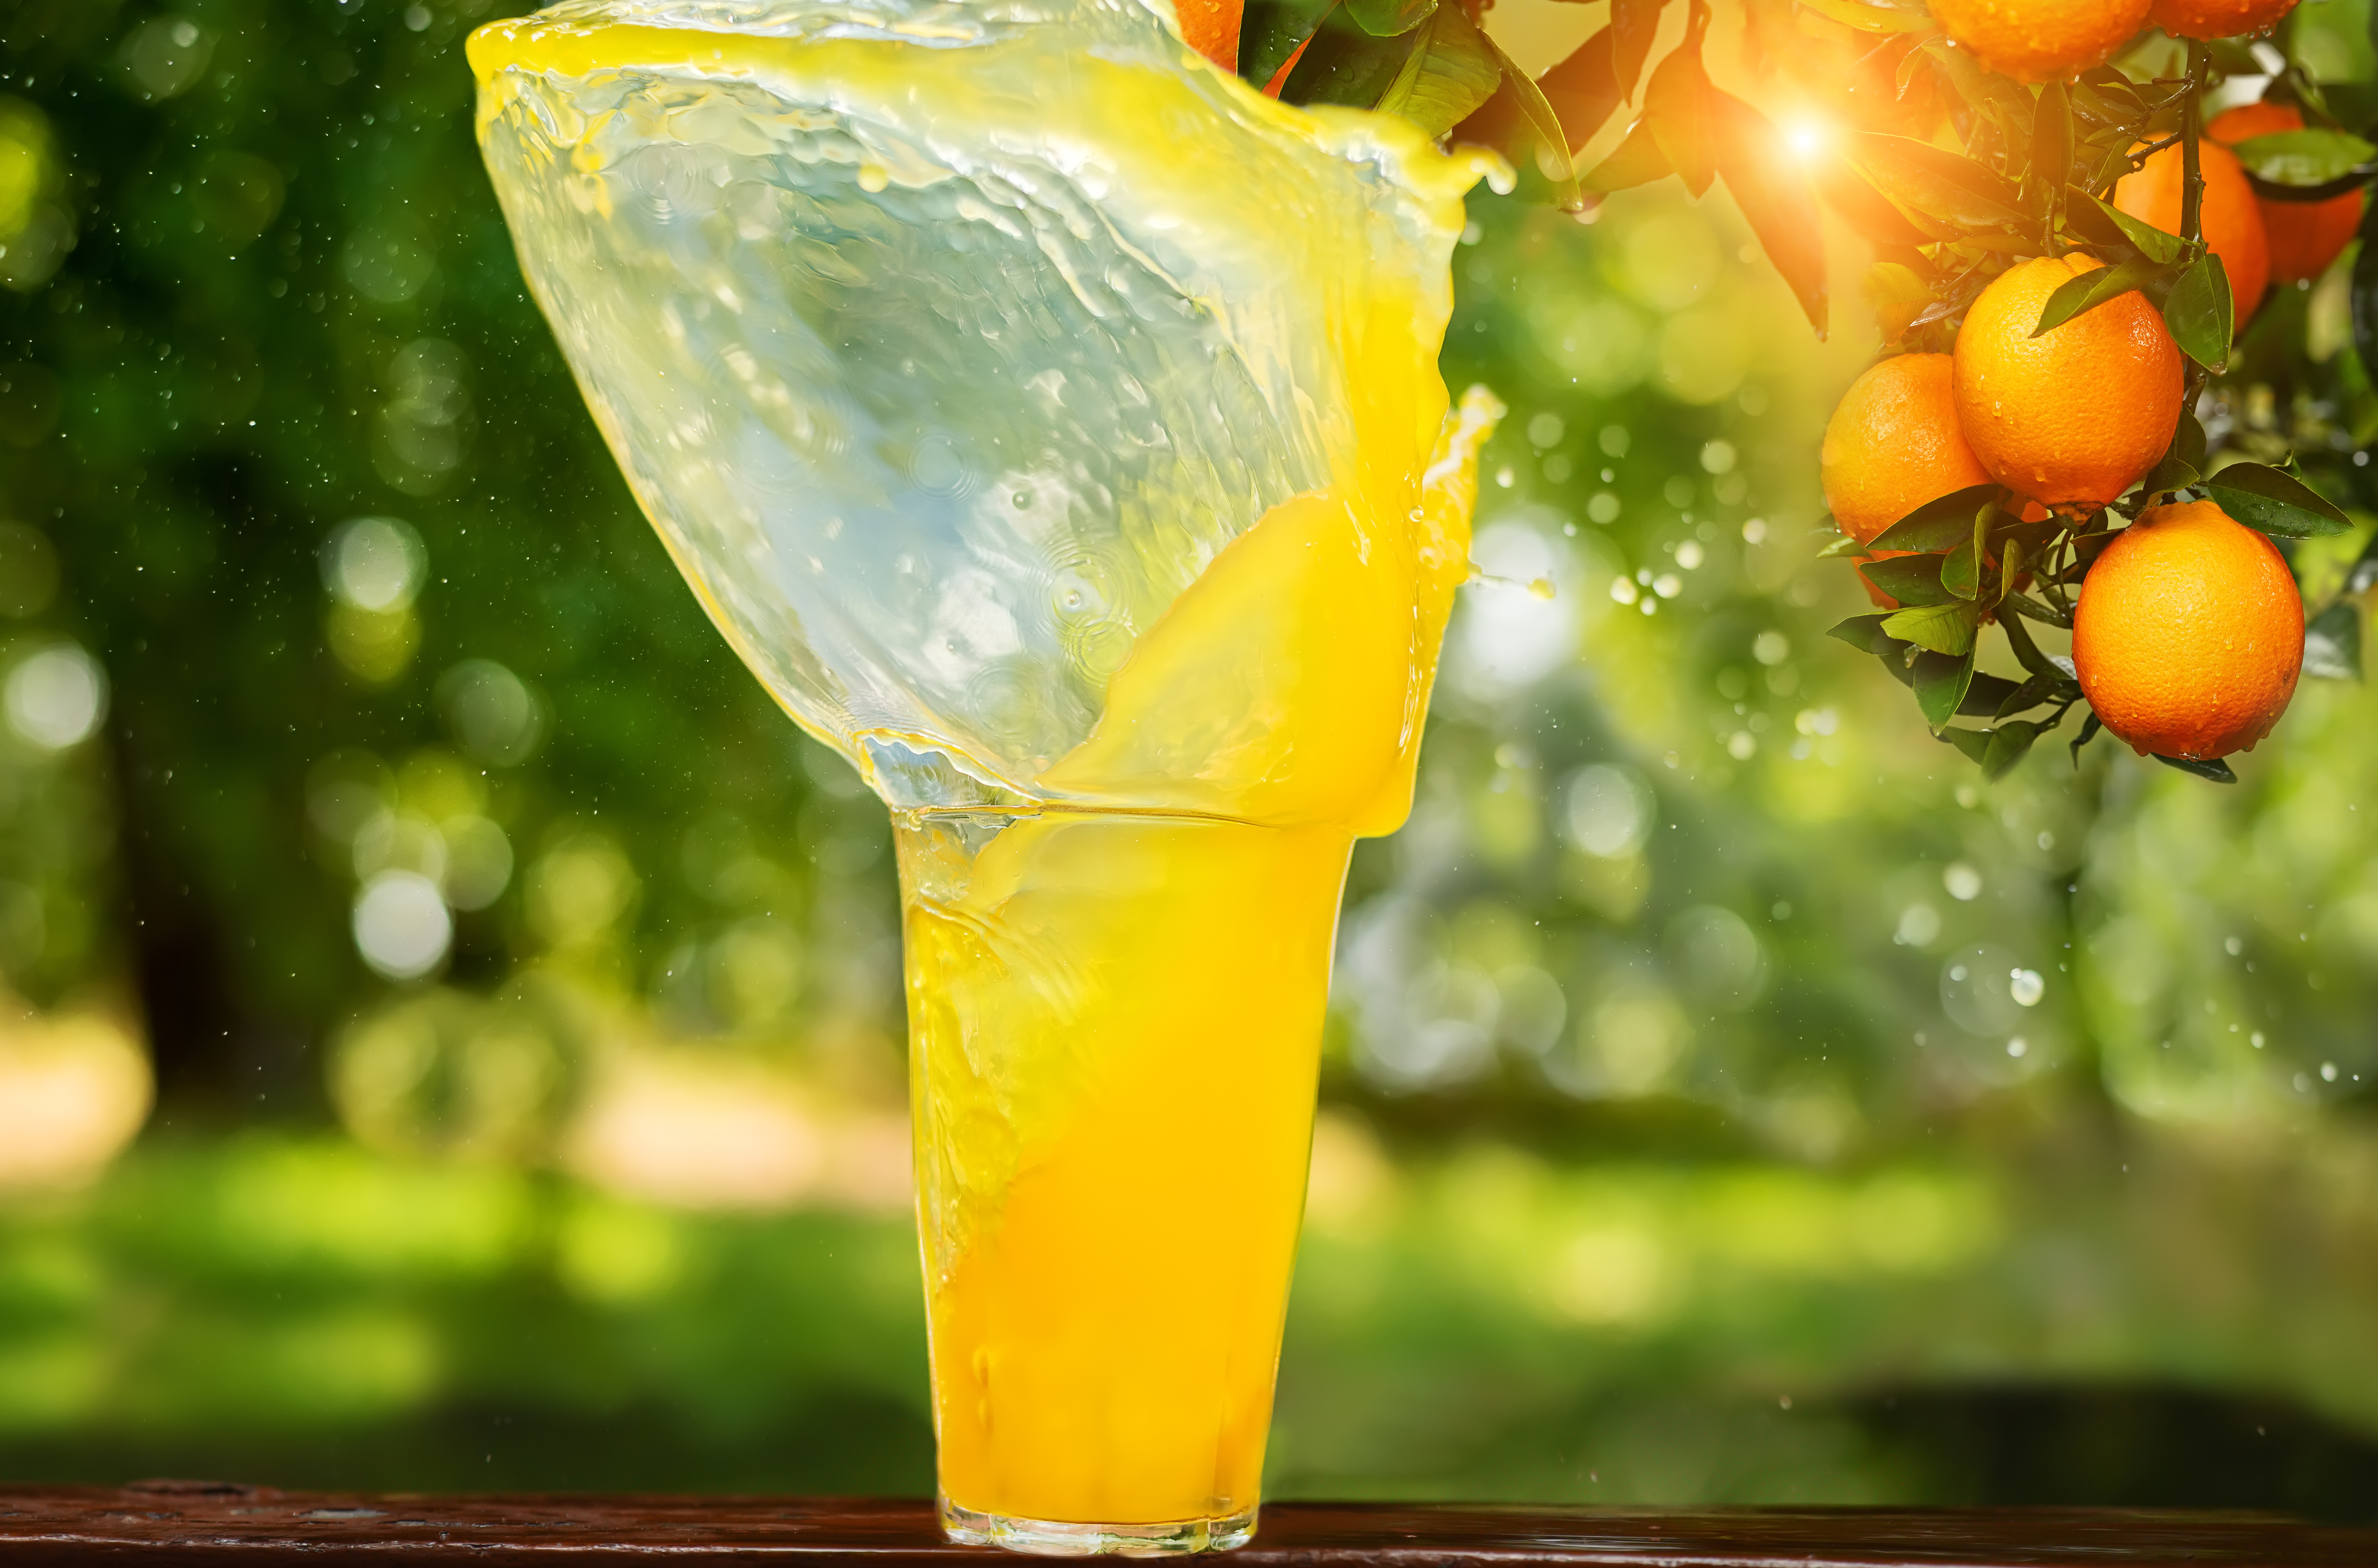 A glass with a bright orange splashing drink against the background of a branch with oranges in the garden.